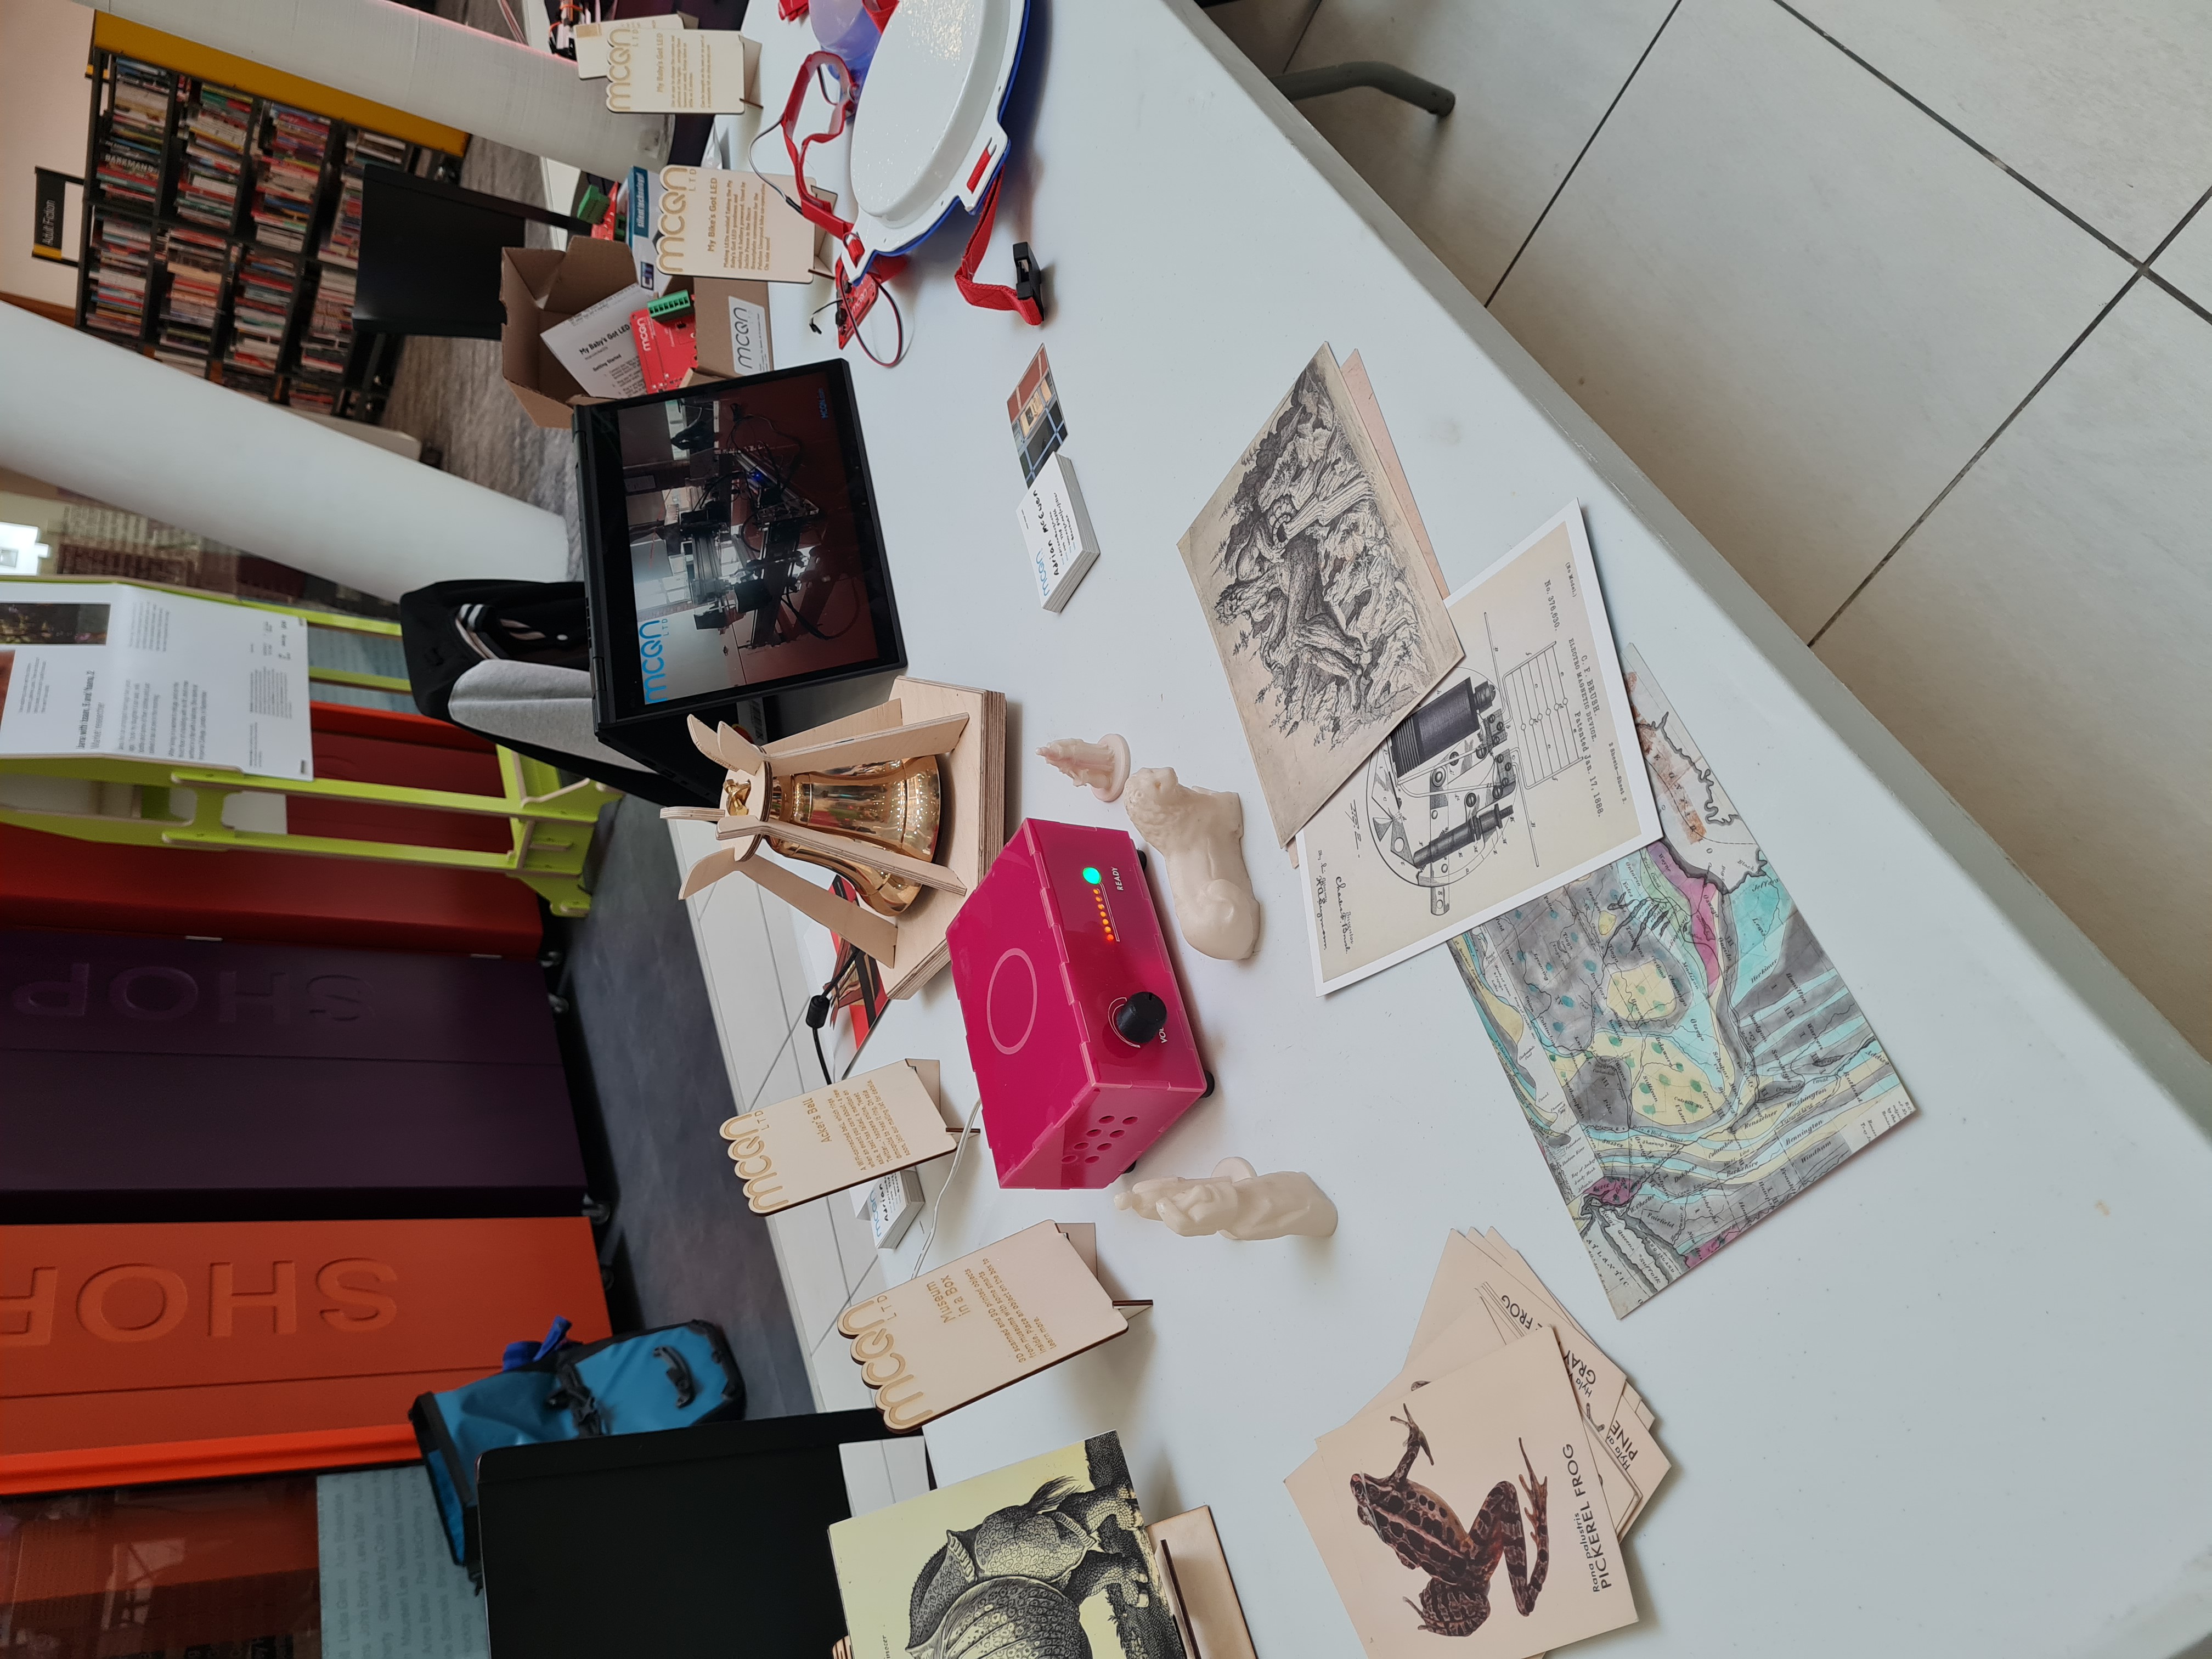 A table featuring several MCQN projects including Museum in a Box - a pink box with a volume dial, surrounded by post cards and 3D printed objects which can be used with it and the Ackers Bell - a brass bell in a pentagonal housing. There is also a screen showing video and the edge of the Peleton MBGL disco breastplates can be seen on the edge of the frame.